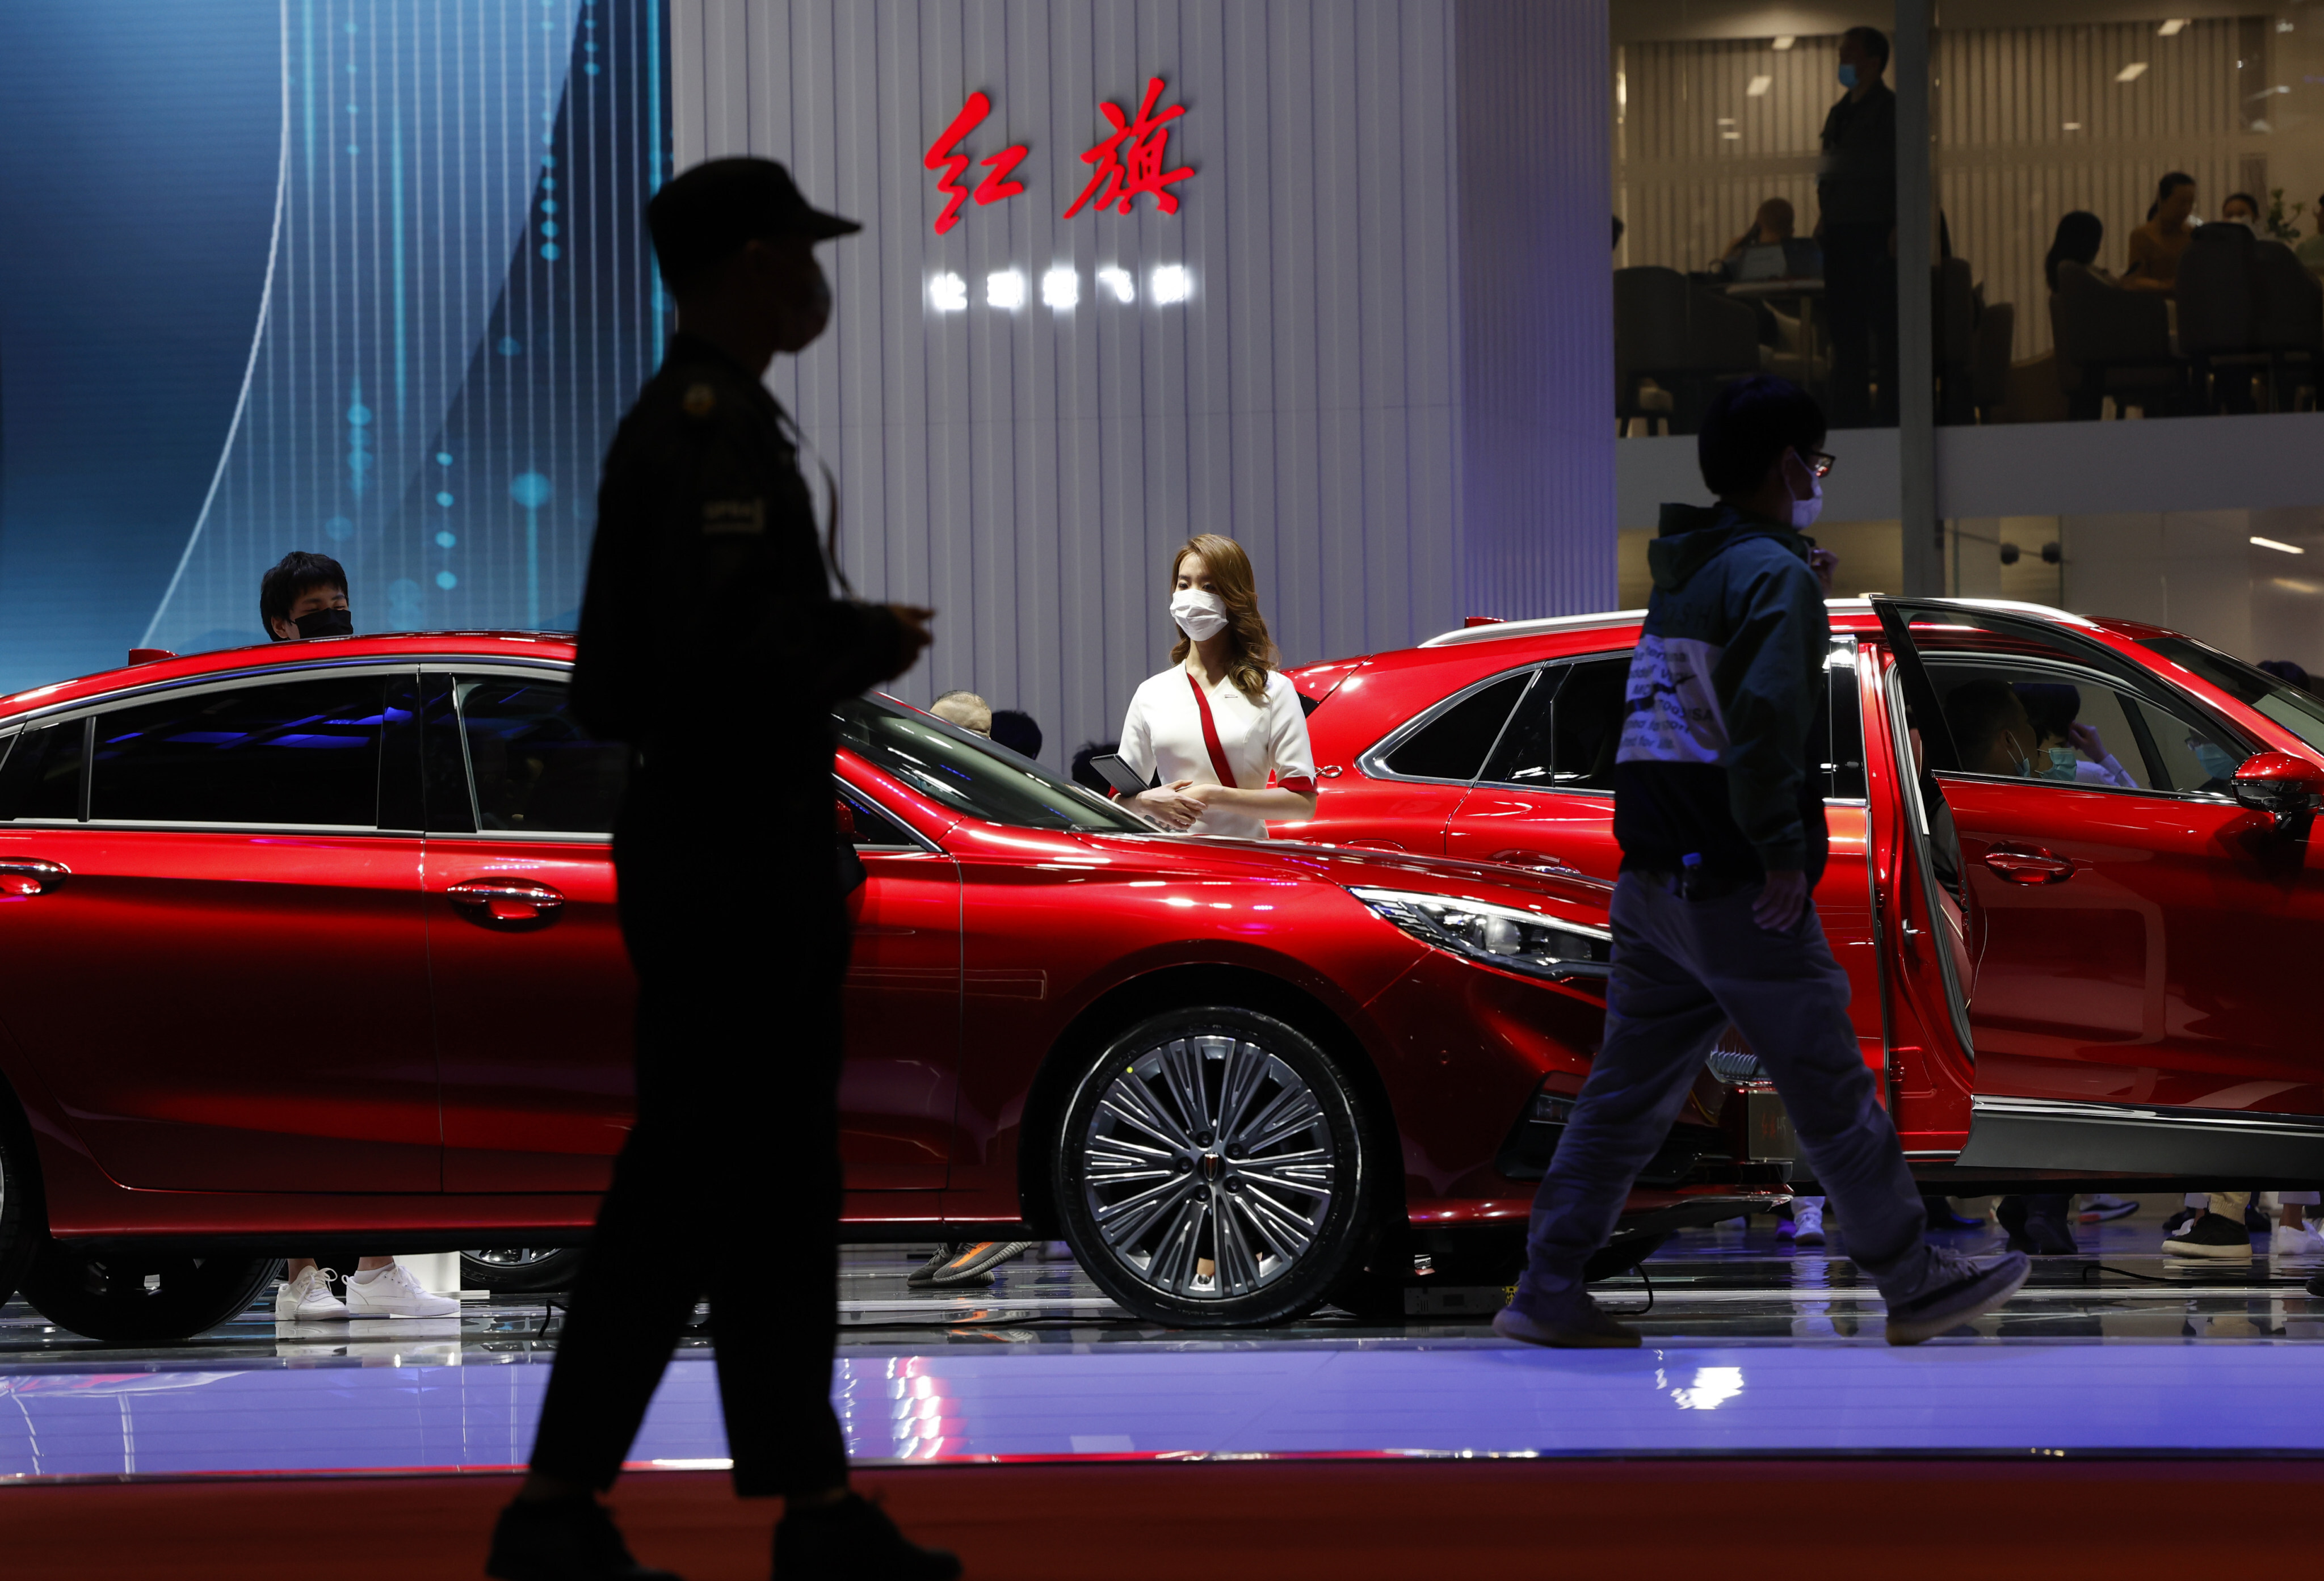 Hongqi cars at the Shanghai Auto Show in April this year. As part of the deal, Hongqi cars will be sold at all Wanda Plazas across China starting in Beijing on January 8. Photo: AP